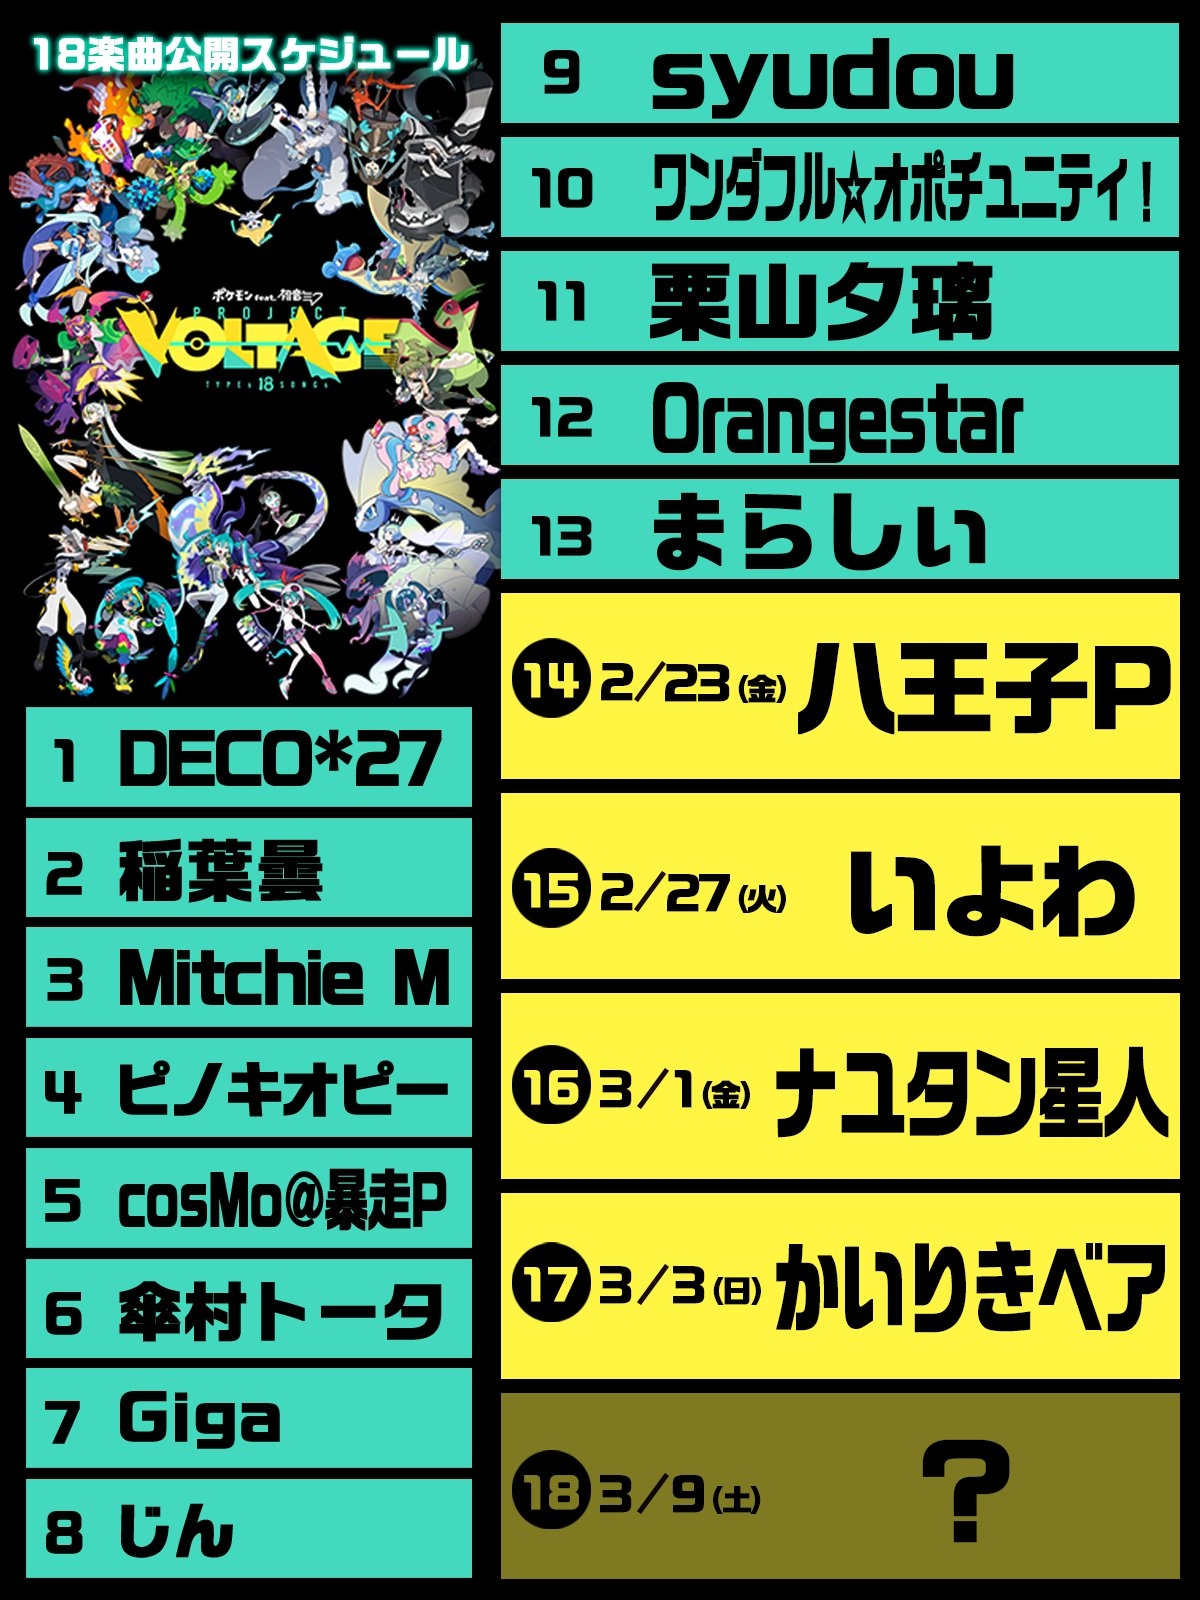 List of participating Project Voltage Vocaloid producers, last updated February 22nd